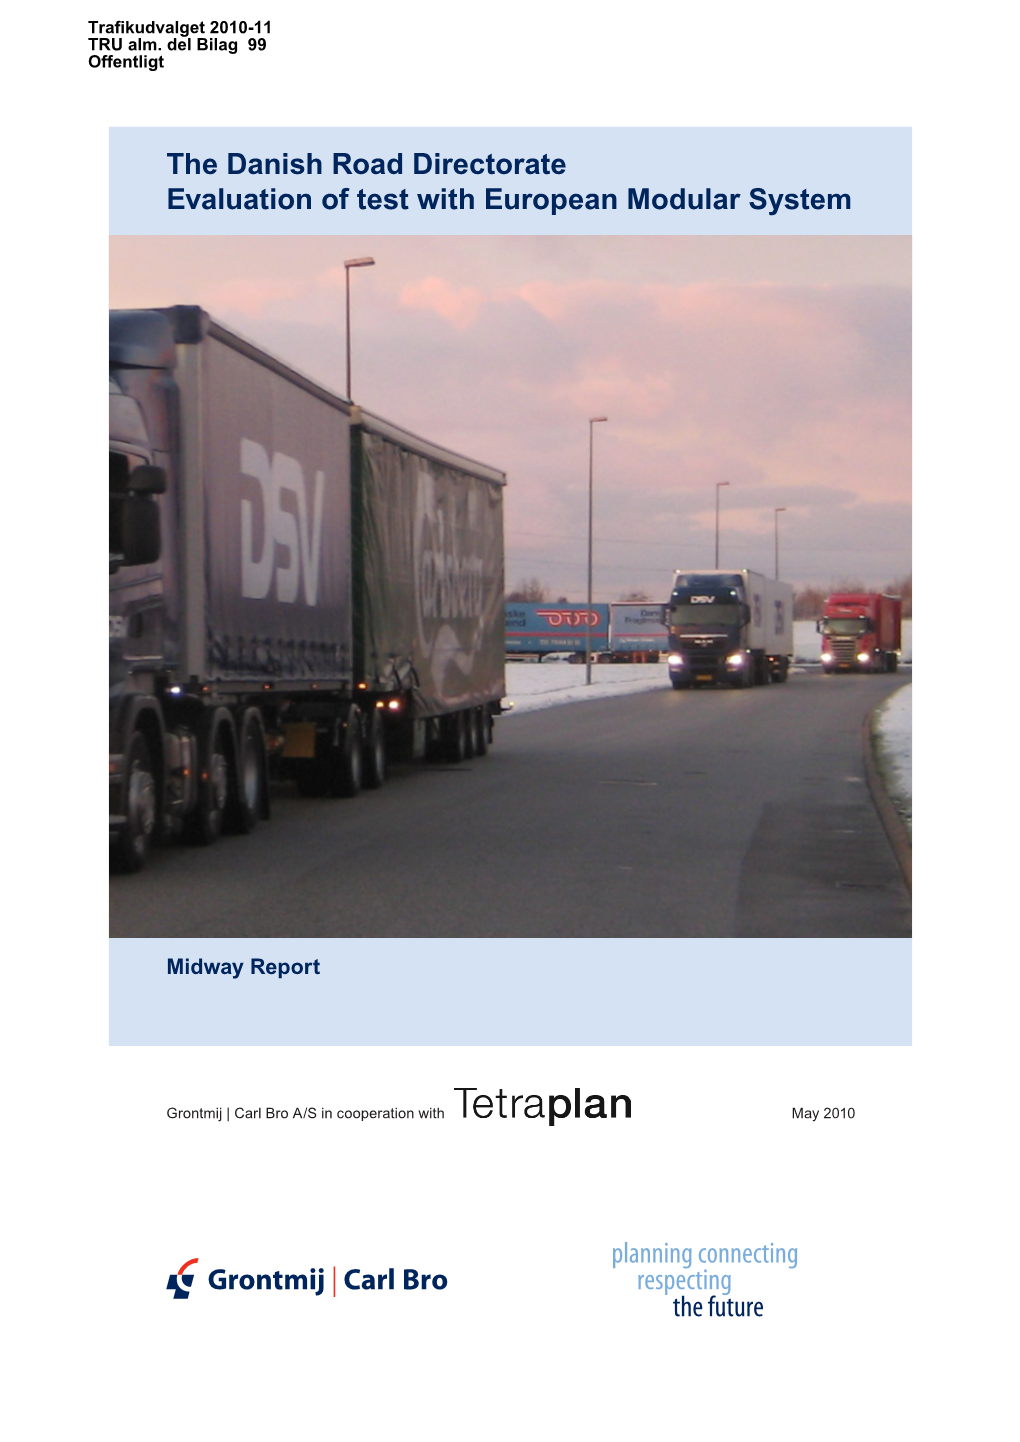 The Danish Road Directorate Evaluation of Test with European Modular System